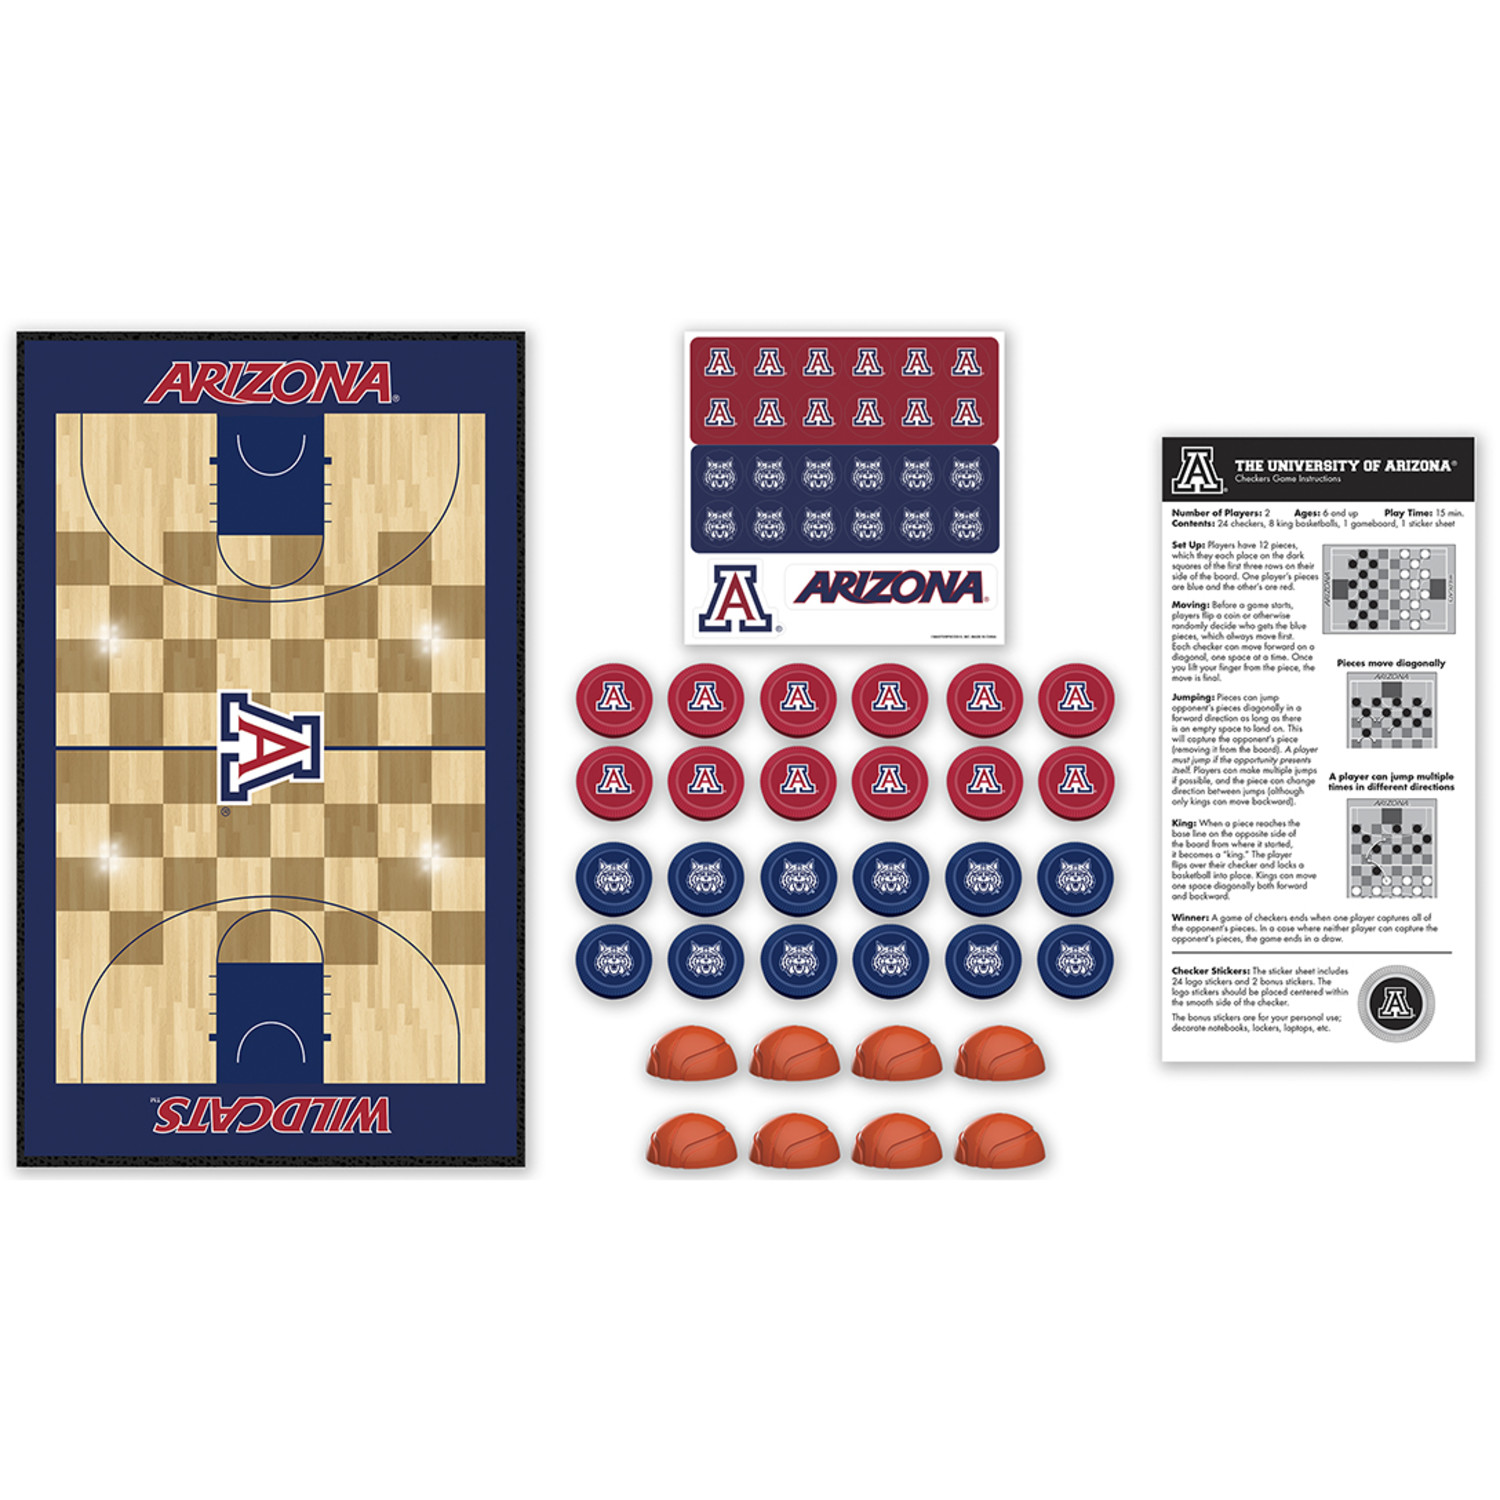 MasterPieces Officially licensed NCAA Arizona Wildcats Checkers Board Game for Families and Kids ages 6 and Up - image 3 of 5